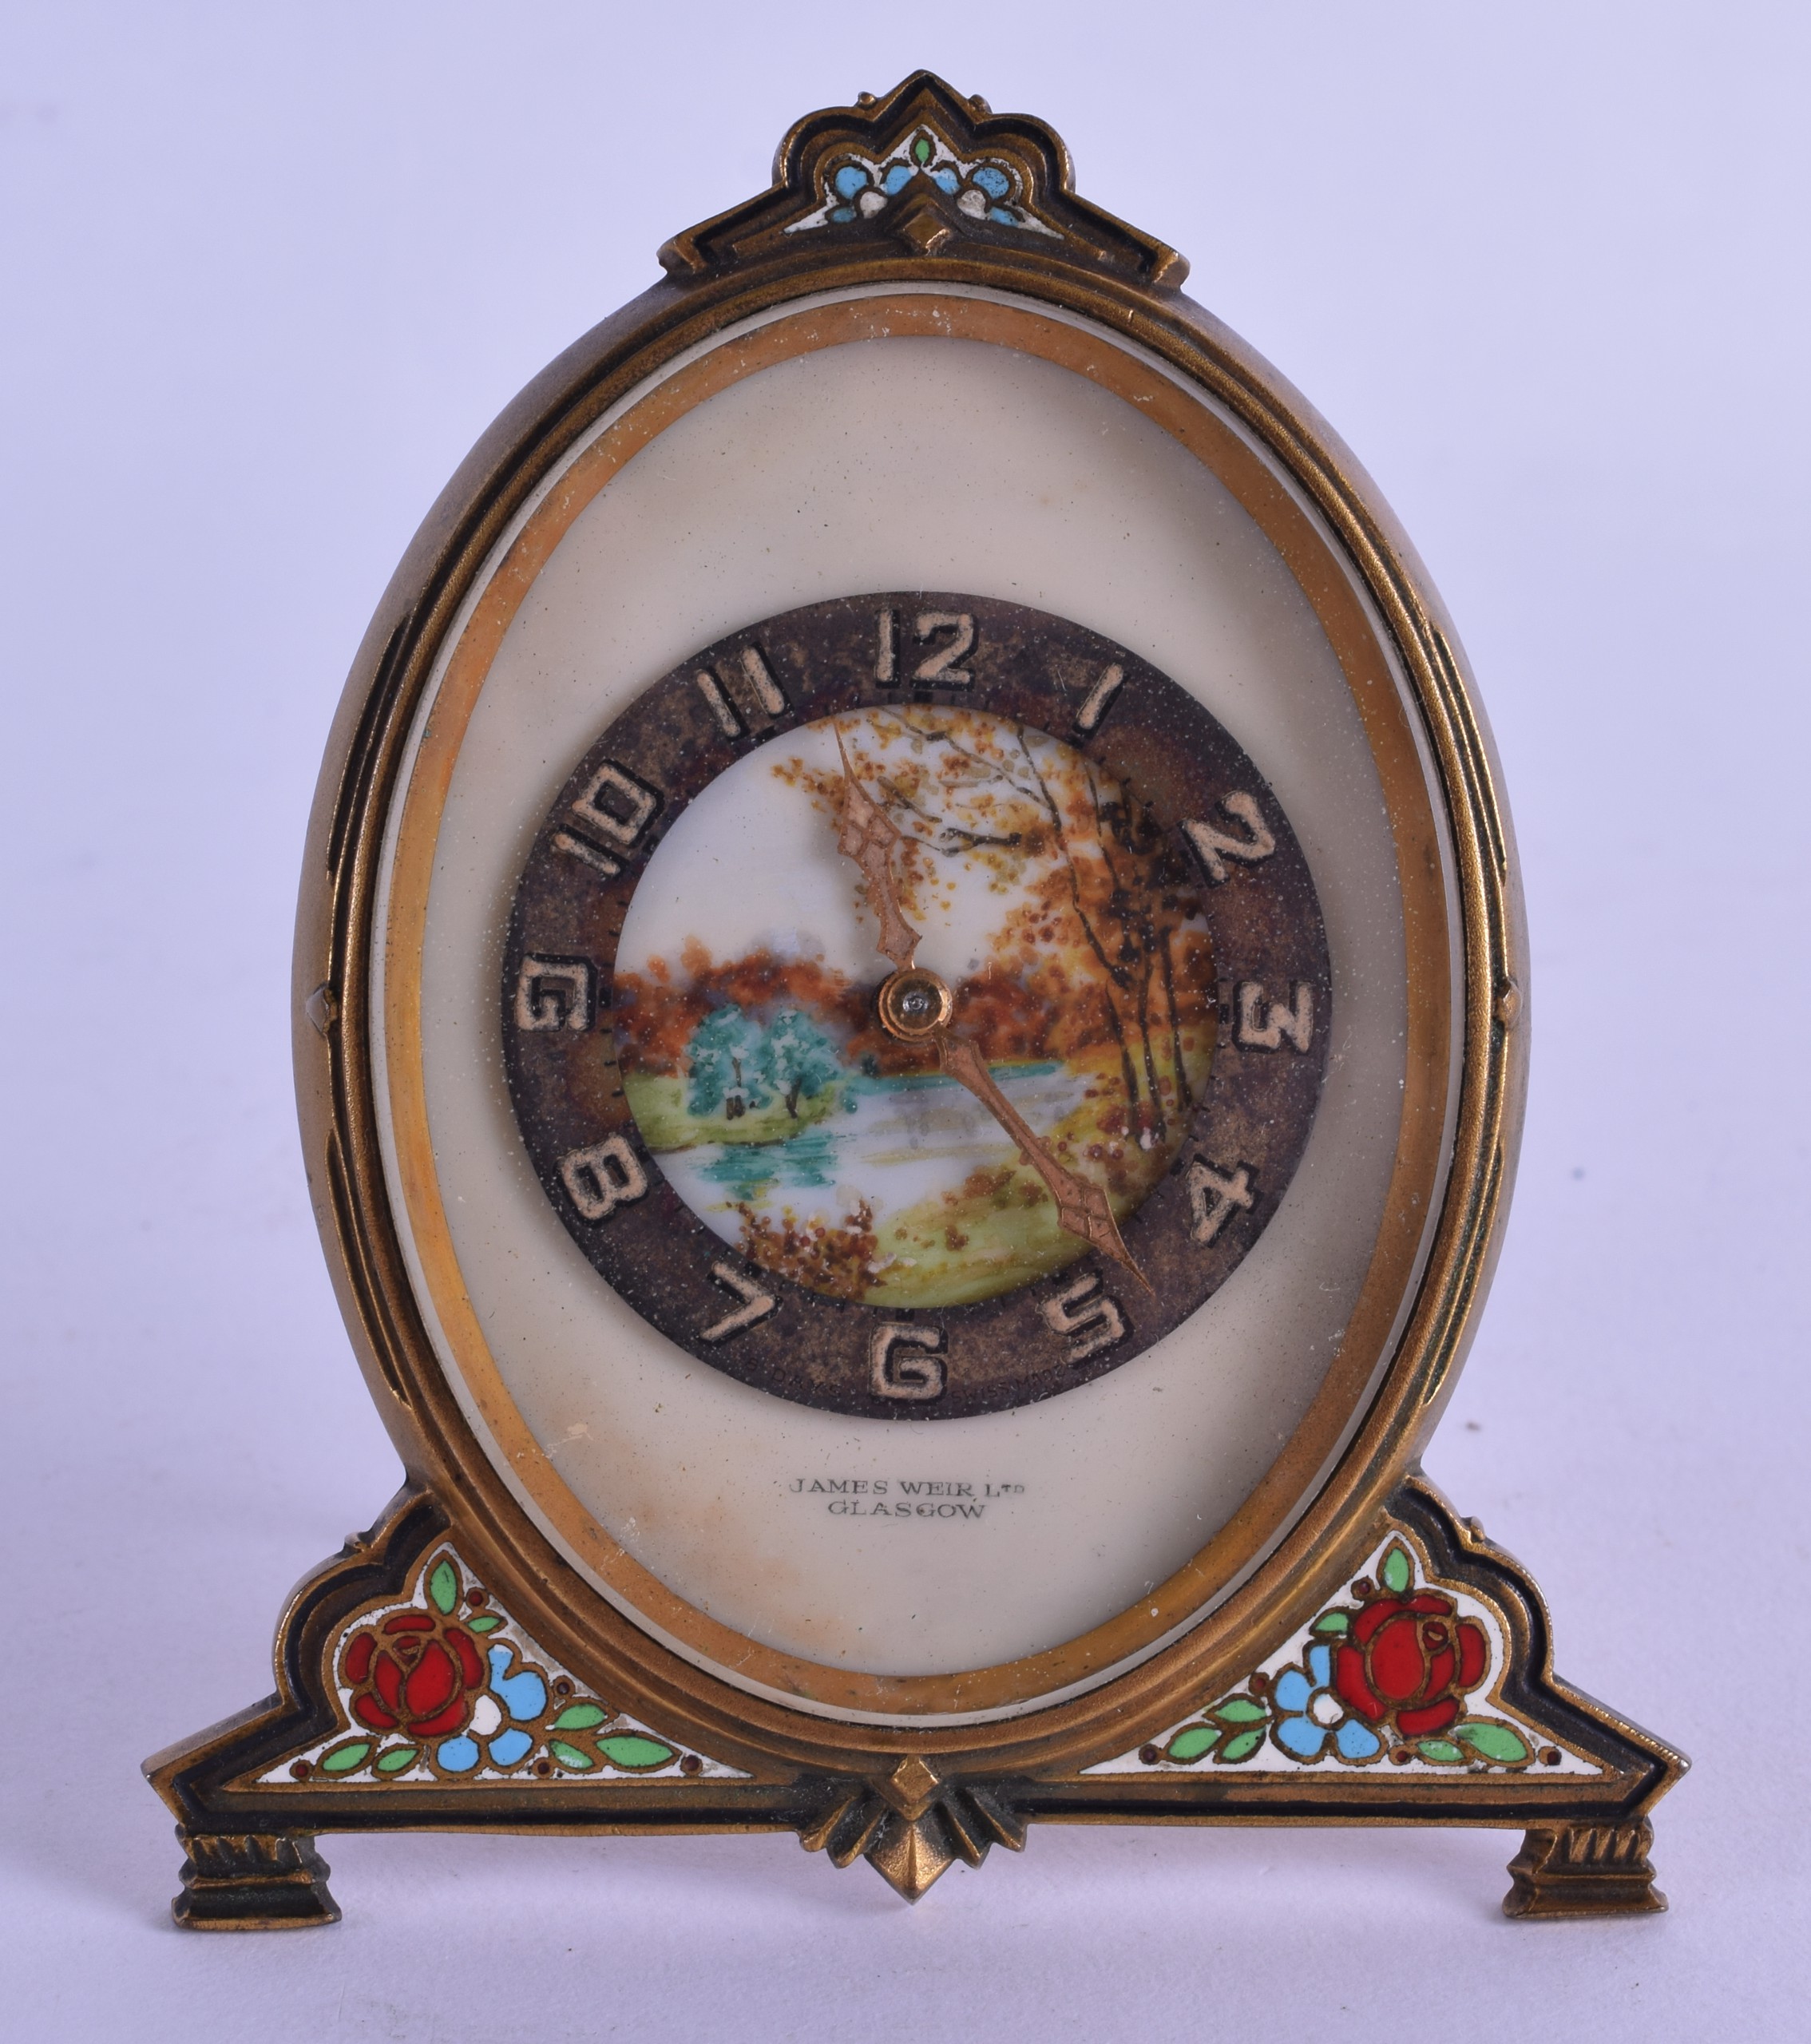 AN EARLY 20TH CENTURY FRENCH CARVED PAINTED IVORY STRUT CLOCK decorated with a landscape, encased